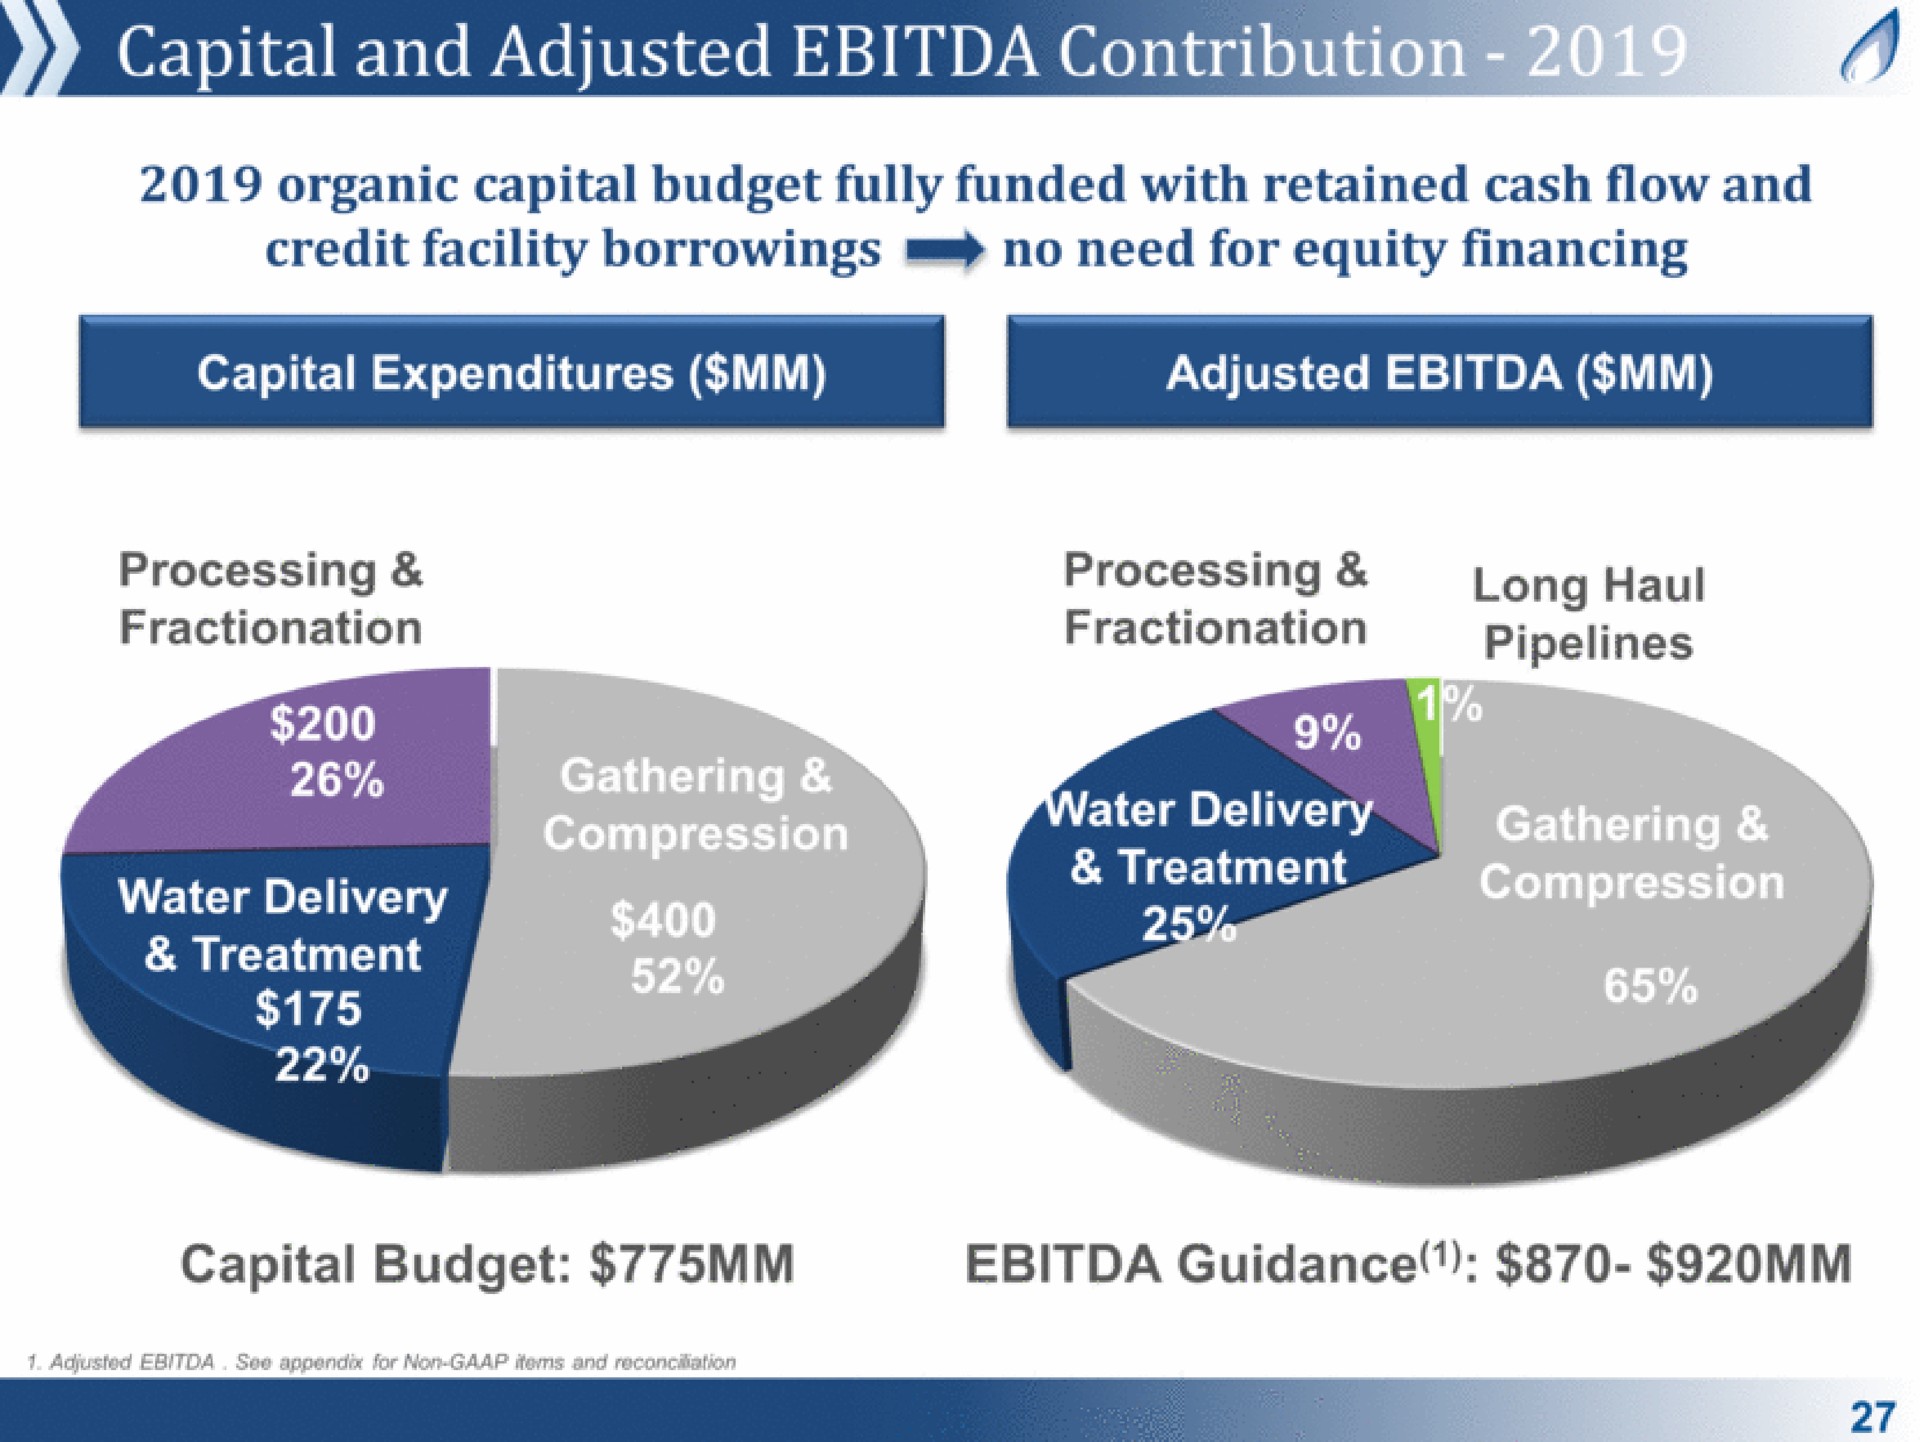 capital and adjusted ads capital budget guidance | Antero Midstream Partners